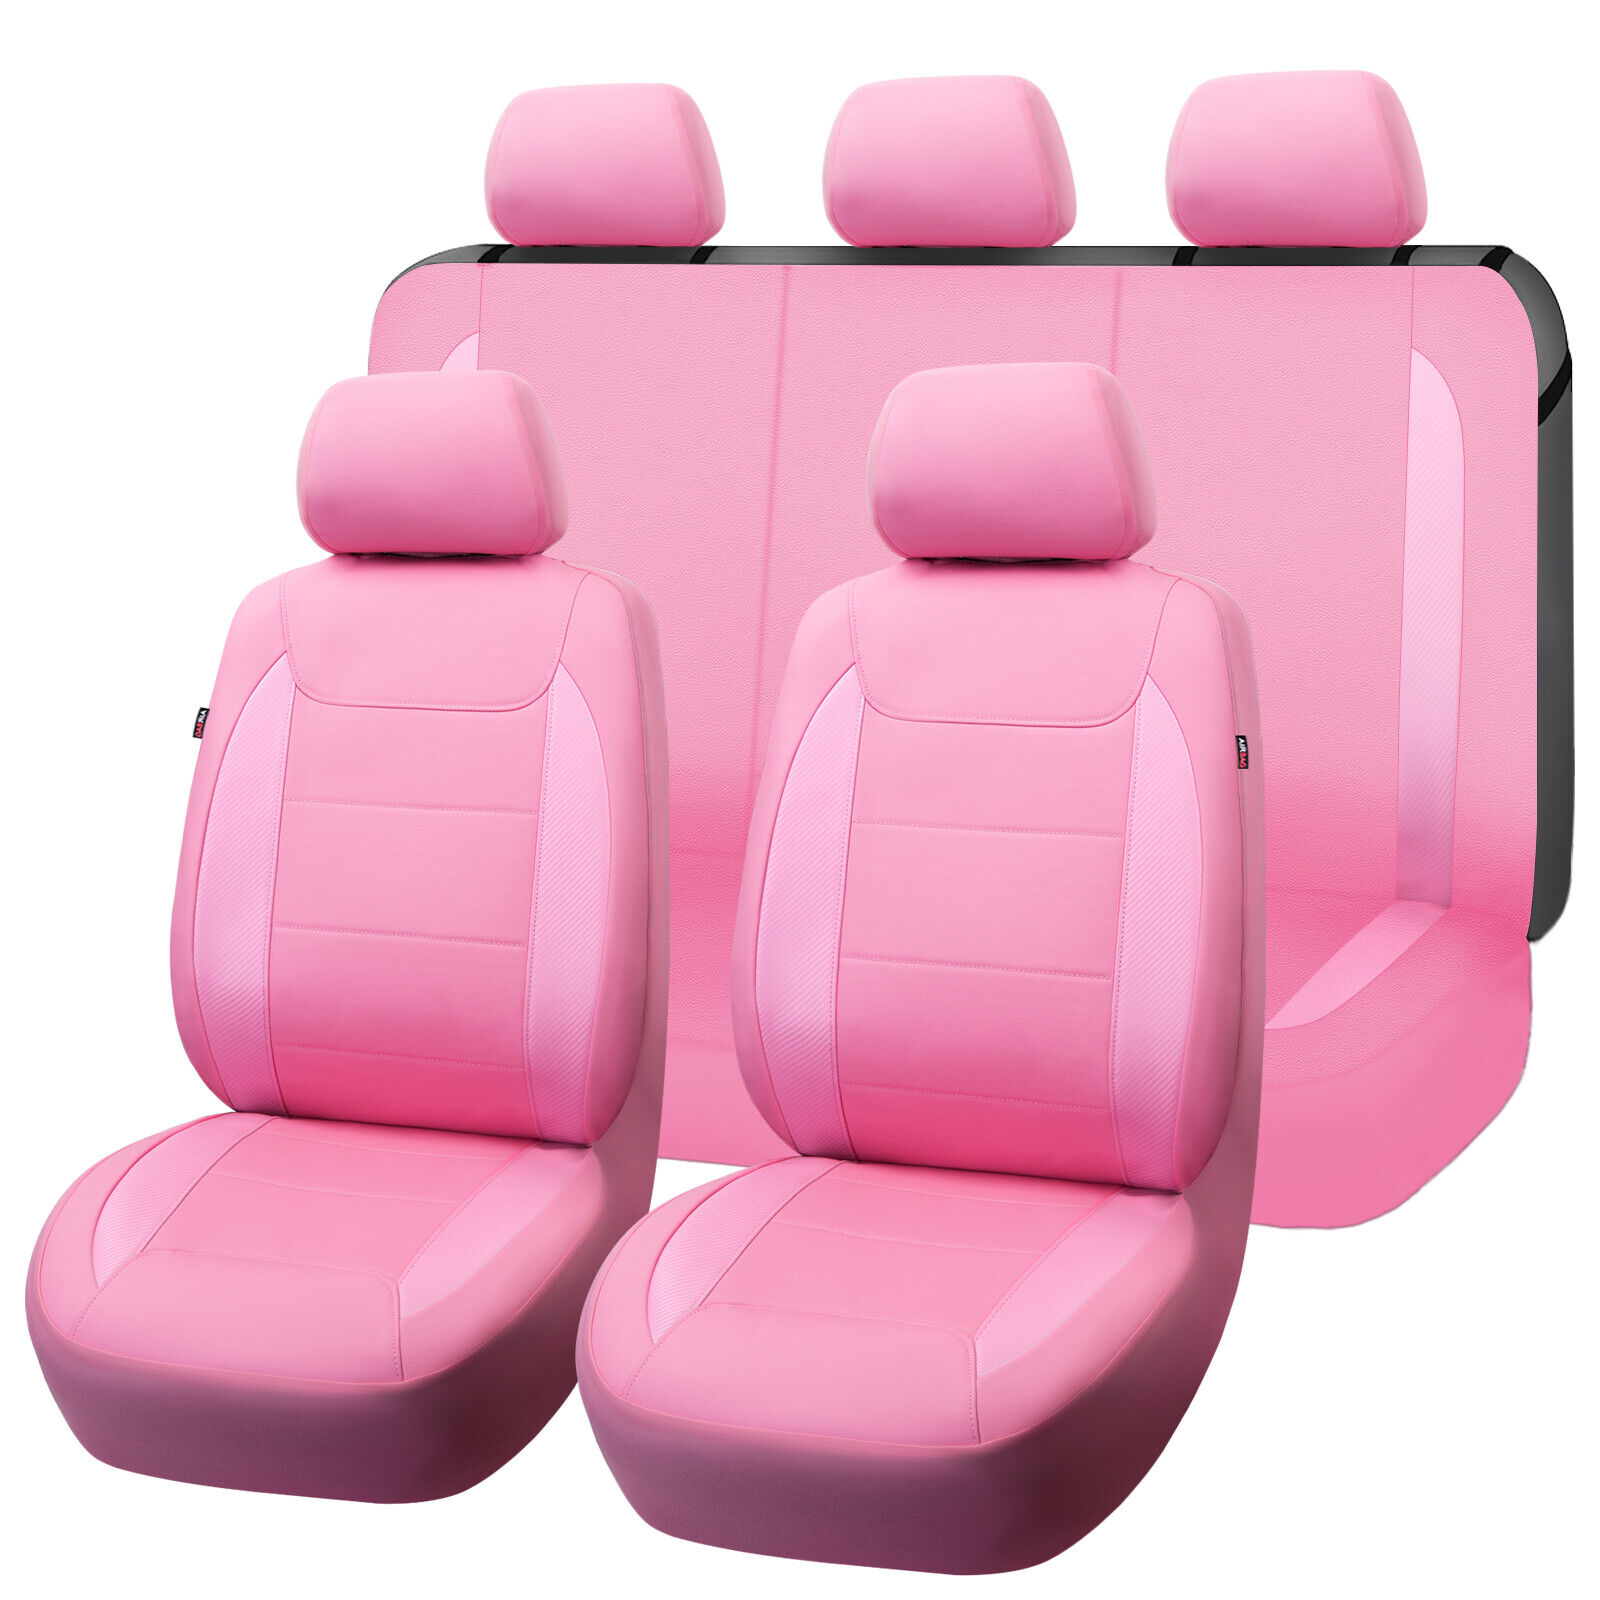 Flying Banner Universal Car Seat Covers Full Set Protectors Pink For Women Girls